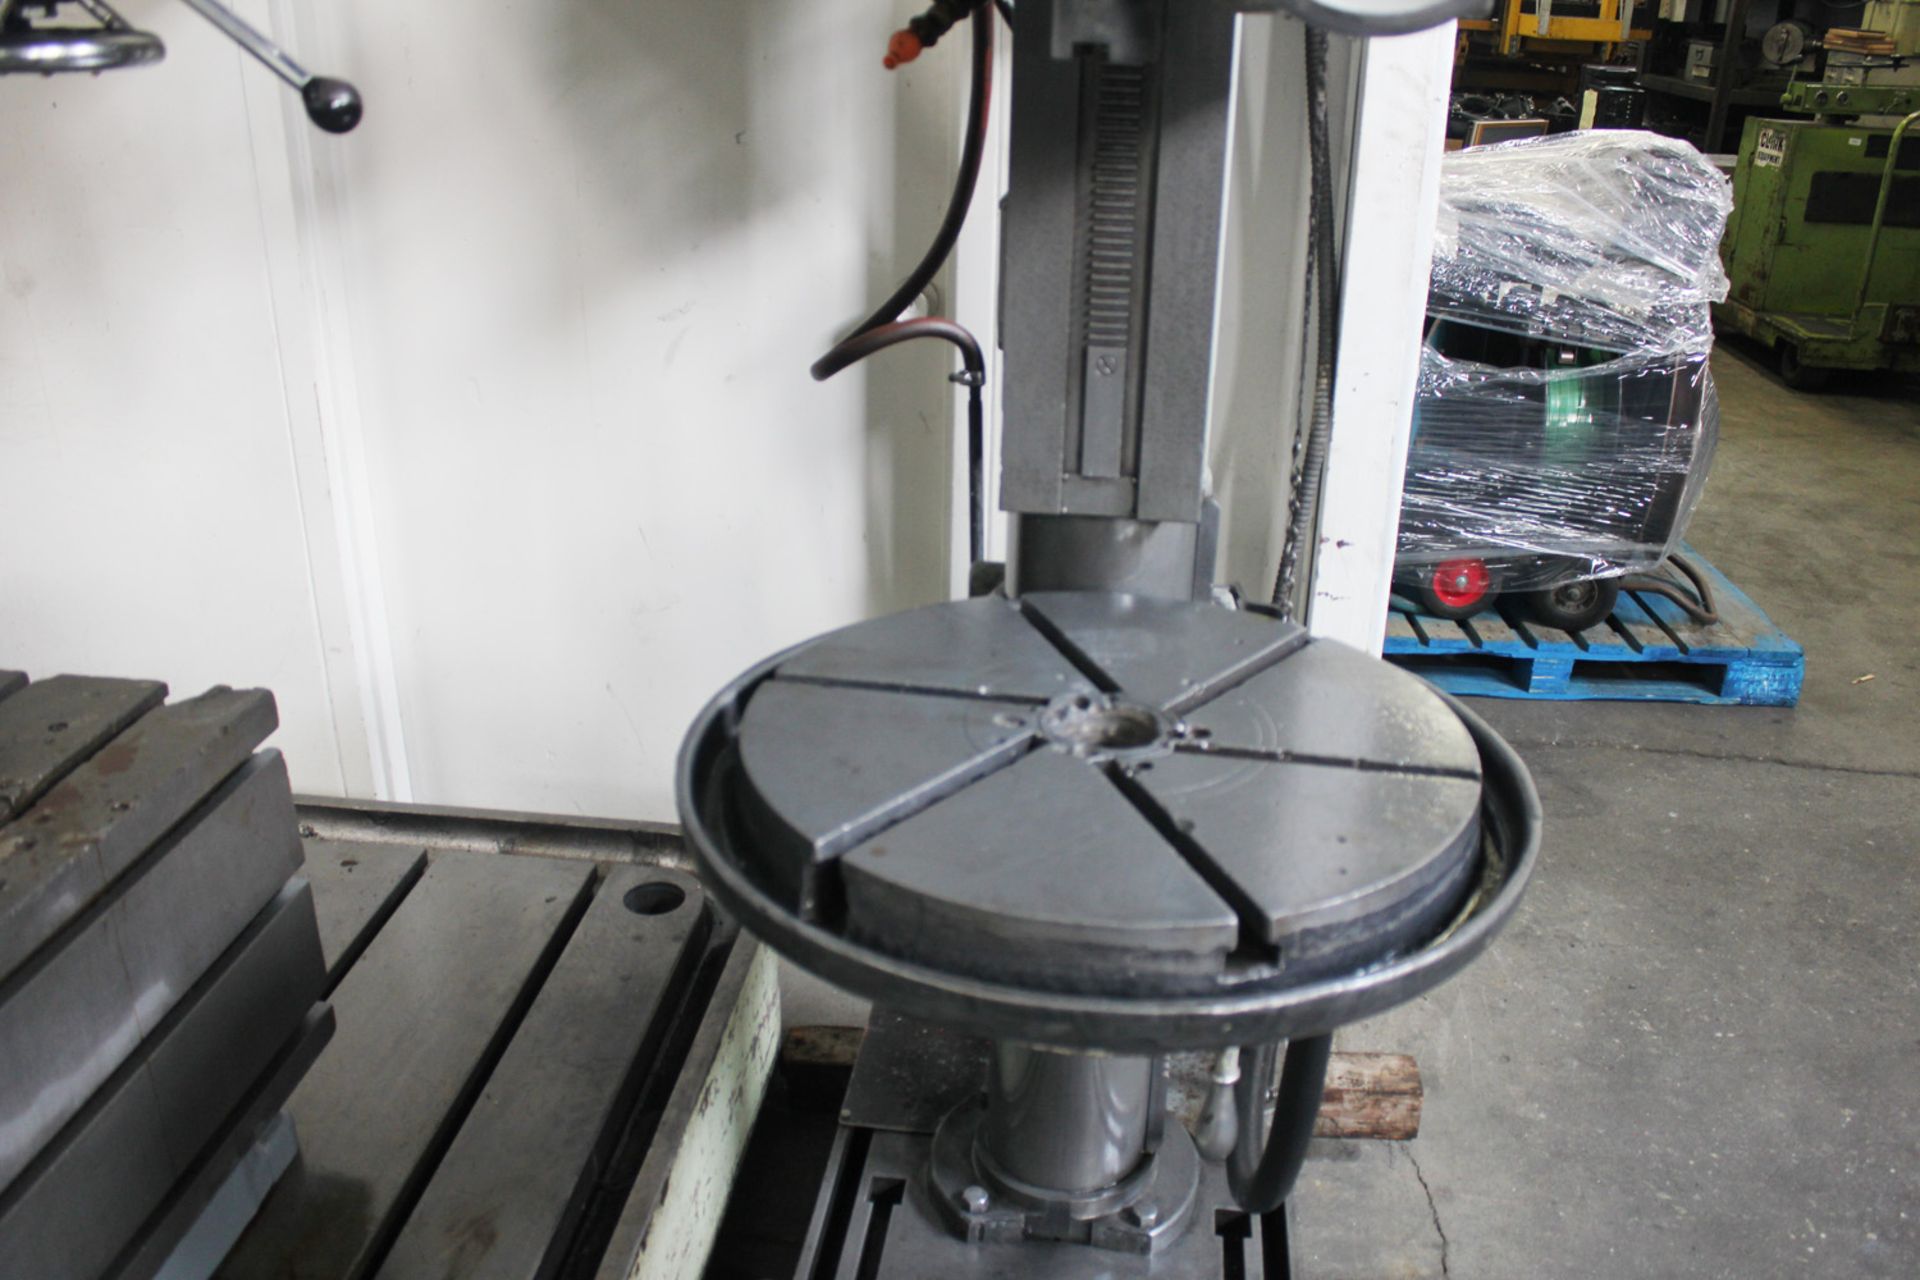 24" Swing Fosdick Drill Press Geared Head 5 HP Floor Metal Hole Drilling - Located In: Huntington - Image 3 of 7